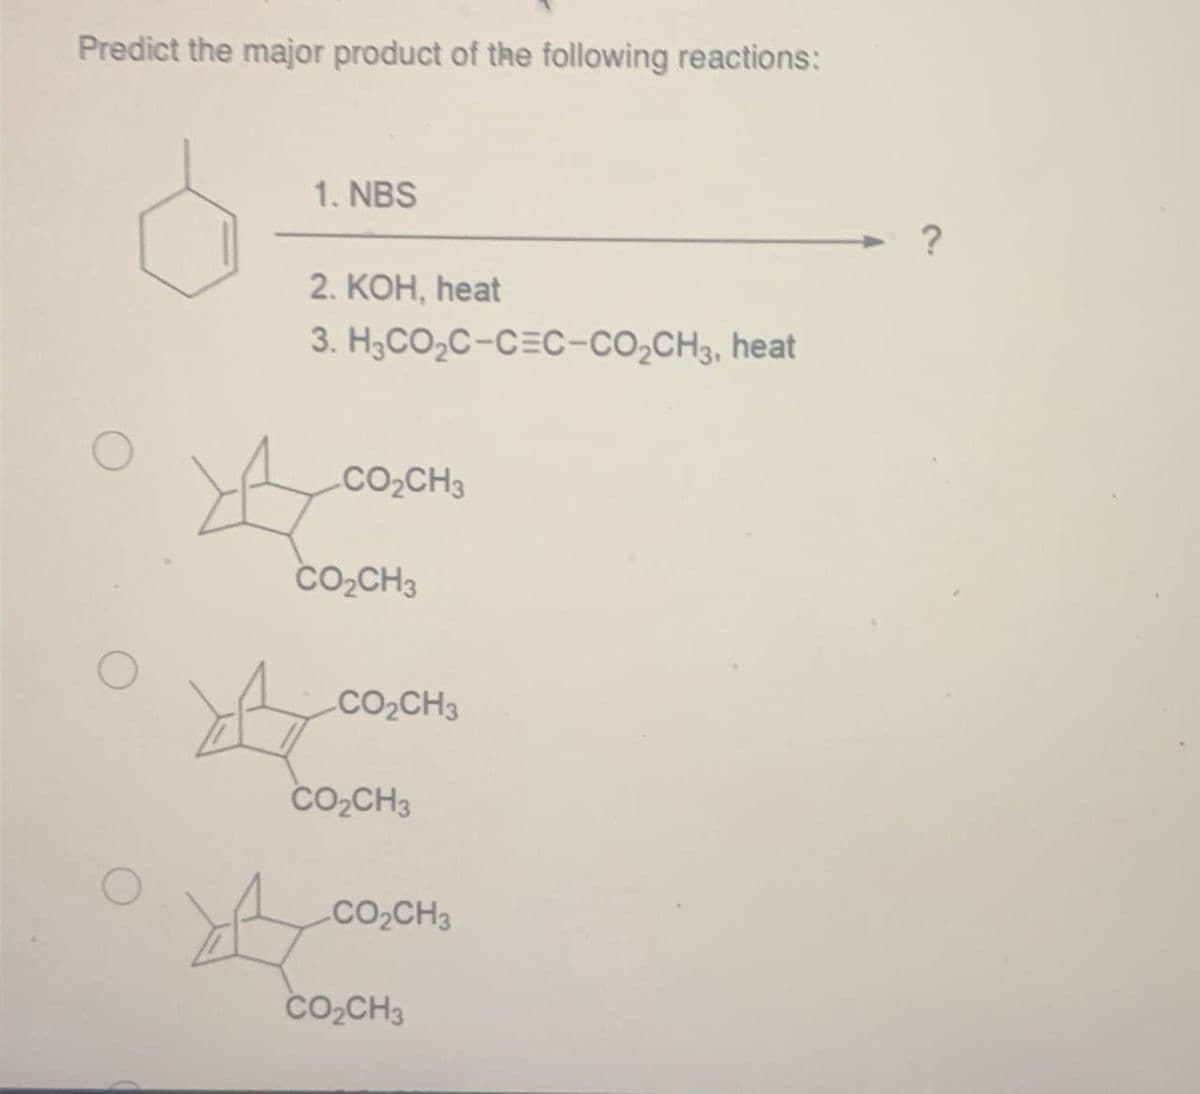 Predict the major product of the following reactions:
O
1. NBS
2. KOH, heat
3.
H3CO₂C-CEC-CO₂CH3, heat
A
CO₂CH3
CO₂CH3
CO₂CH3
CO₂CH3
CO₂CH3
CO₂CH3
?